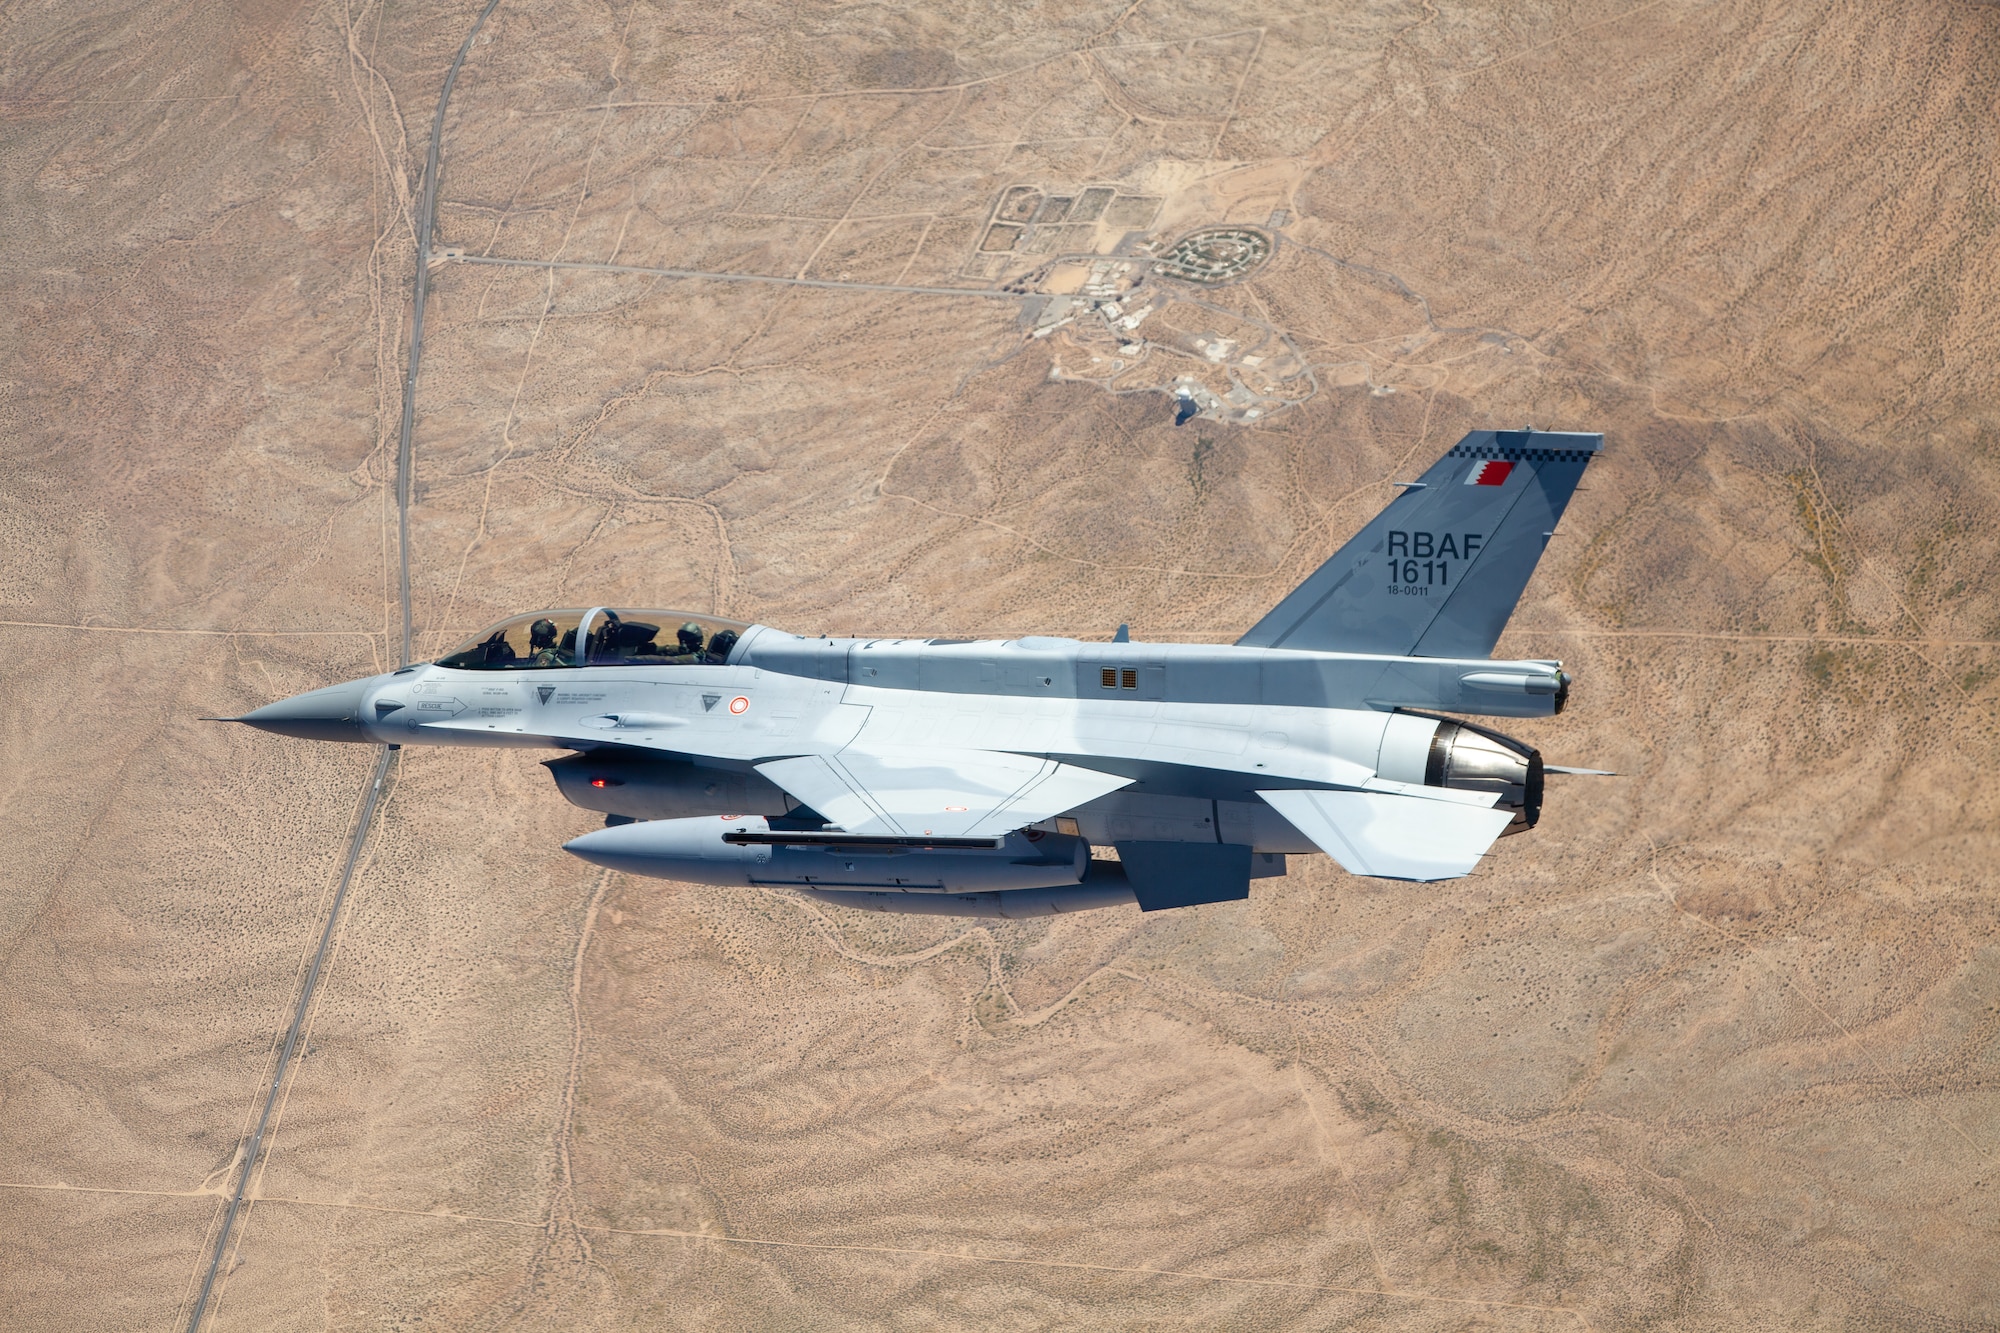 An F-16 Block 70 aircraft flies in the skies above Edwards Air Force Base, California, March 28, 2023. The newest variant of the fighter jet is being tested by the newly-renamed Airpower Foundations Combined Test Force at Edwards AFB. (Air Force photo by Christian Turner)